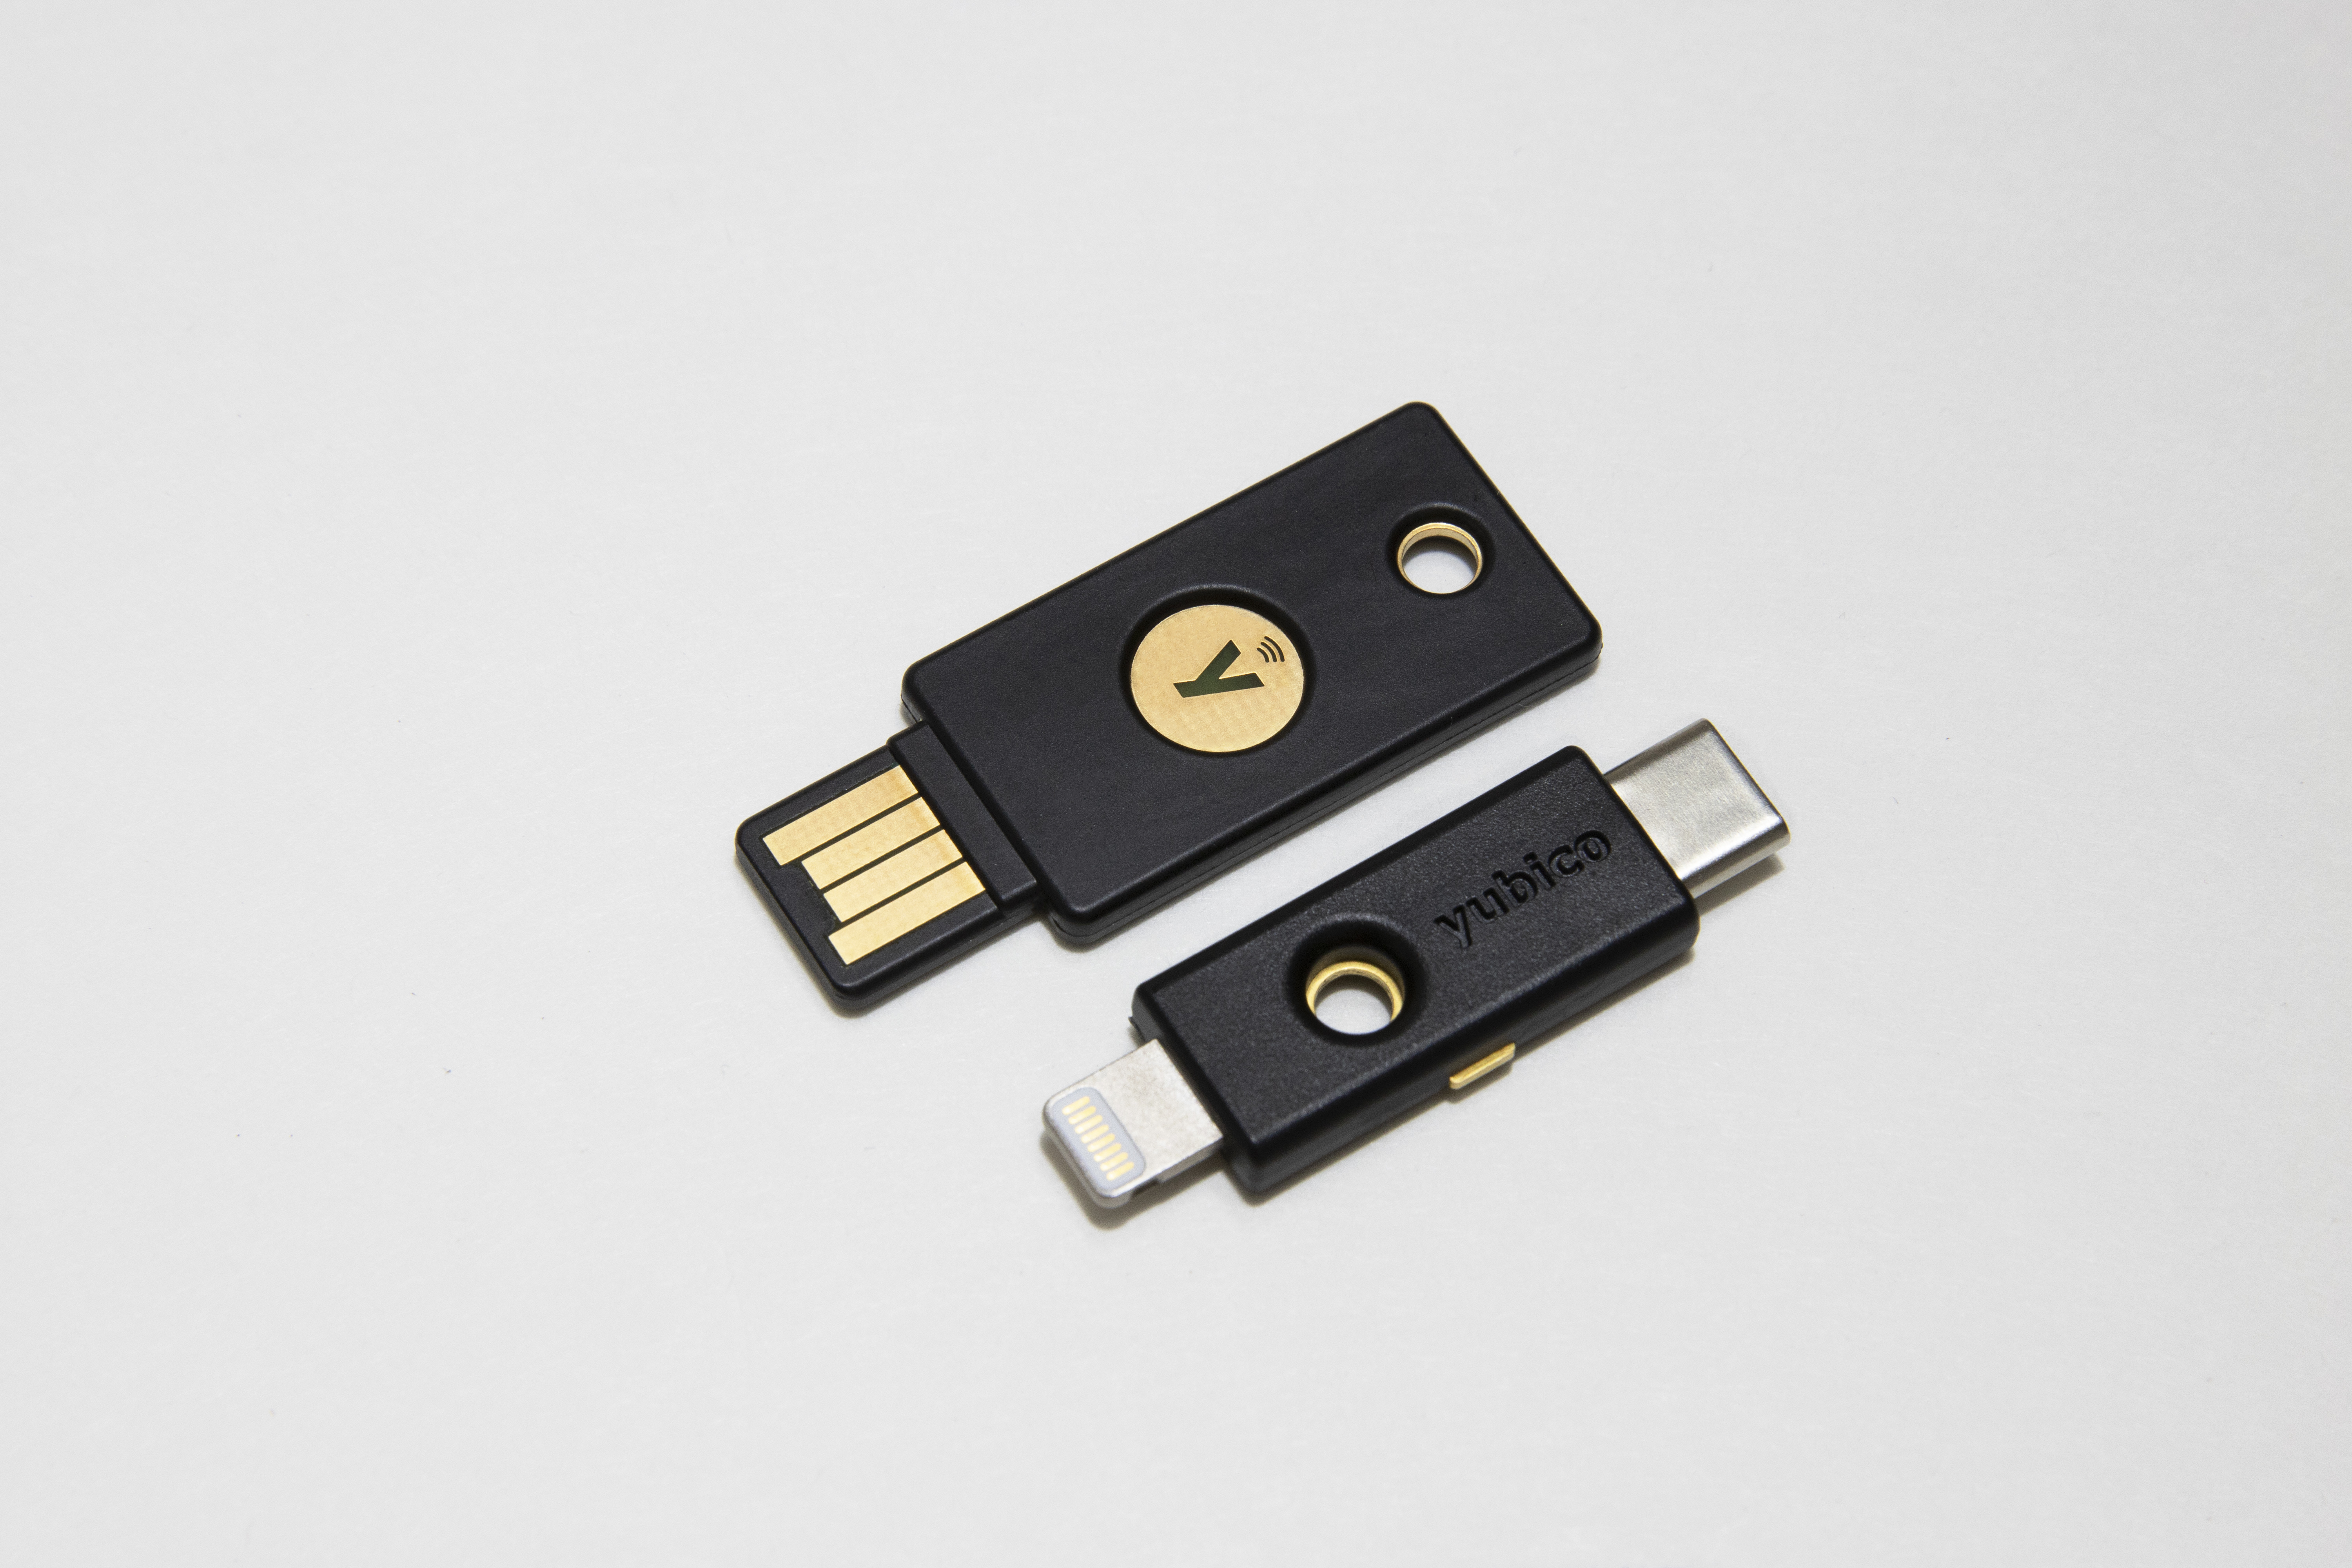 format flash drive for mac and windows 10